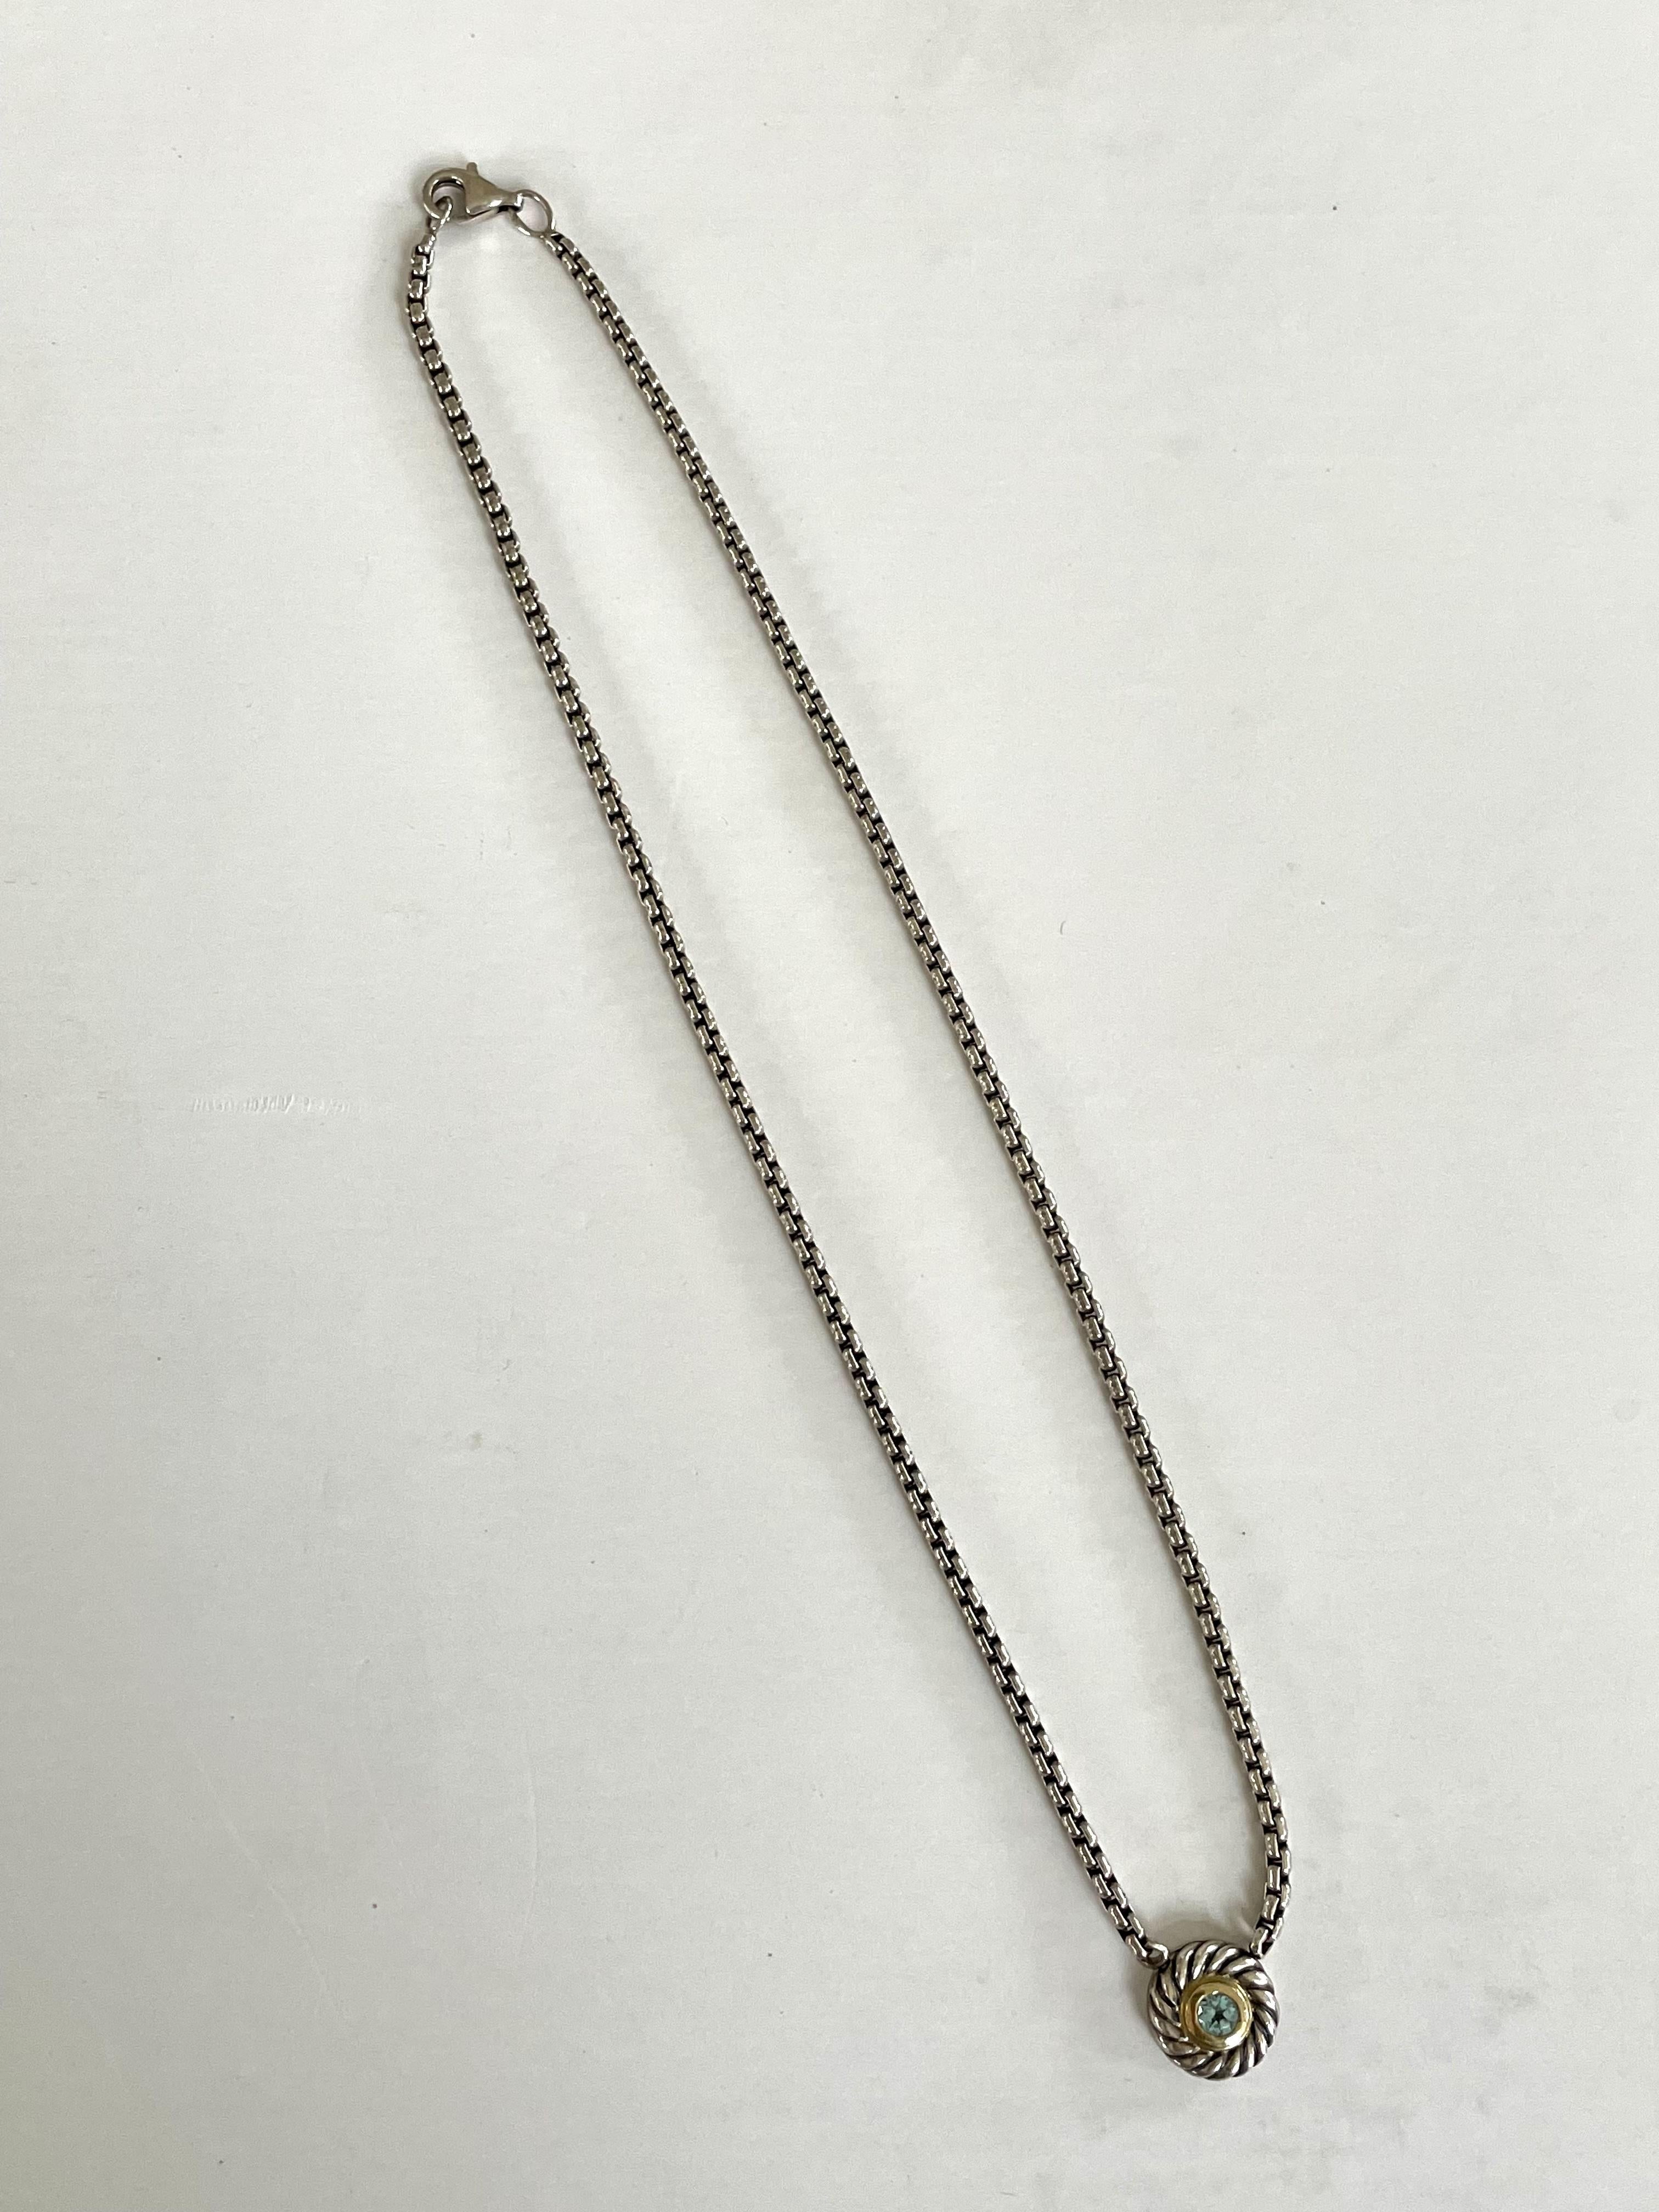 Women's Vintage David Yurman Sterling Silver Box Link Chain and Pendant Necklace